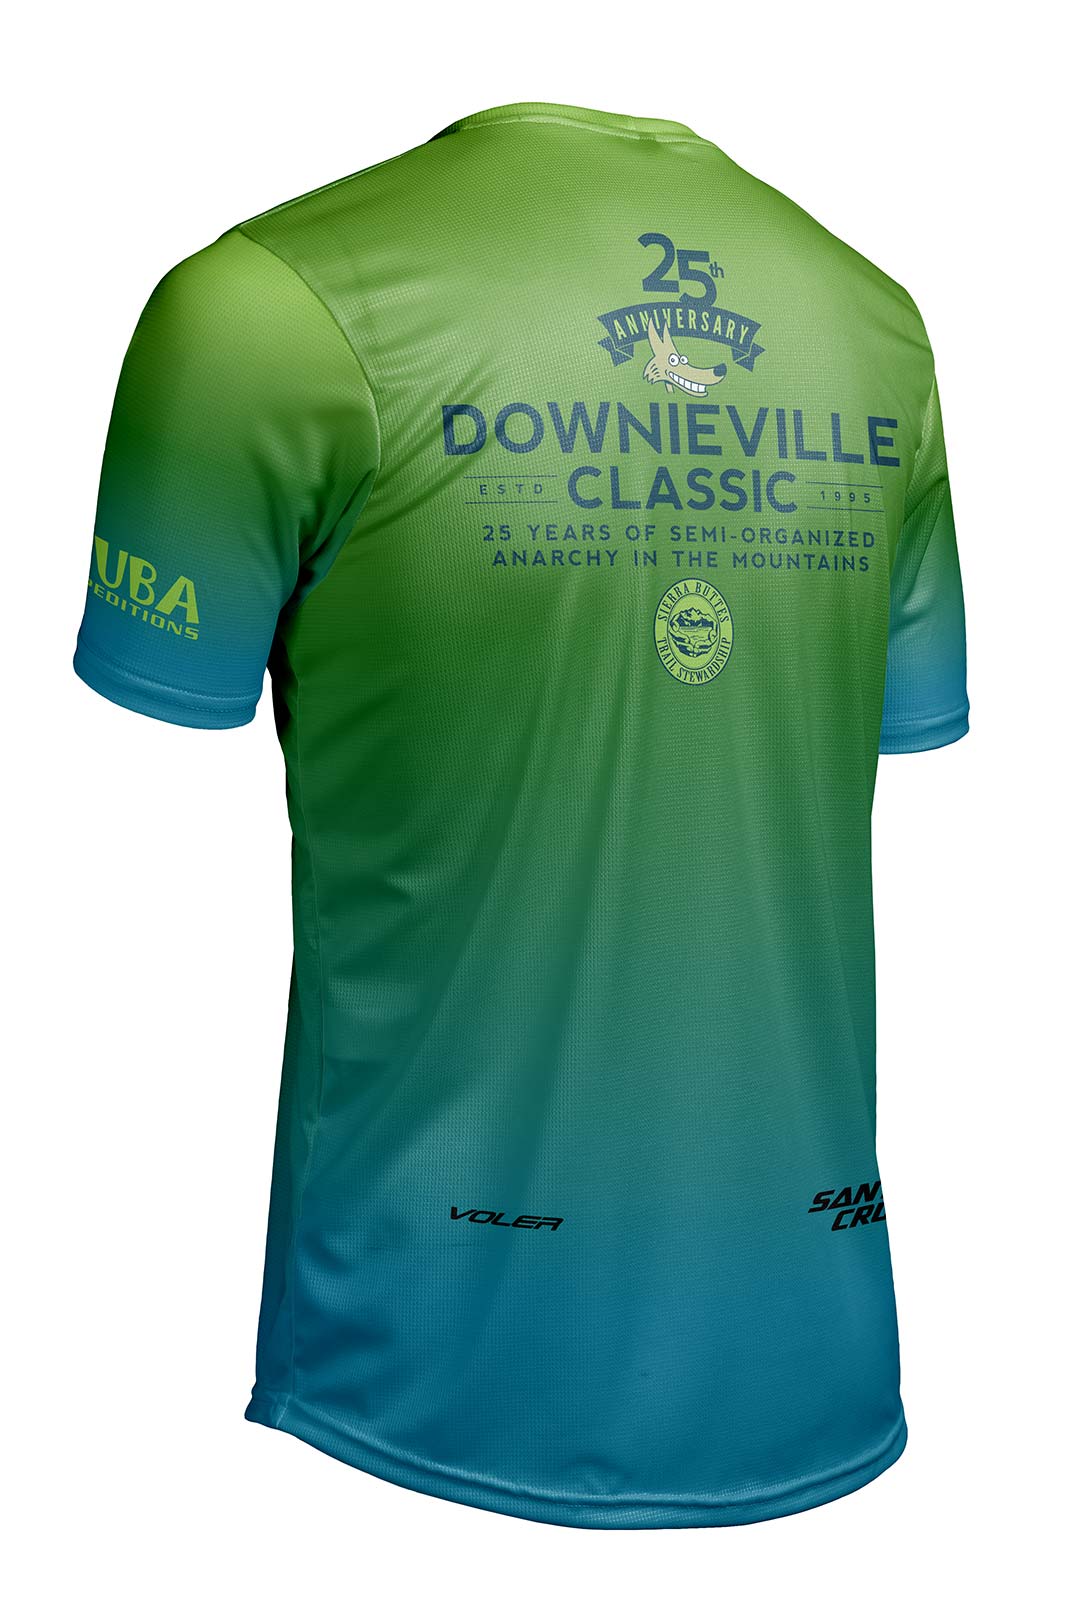 2023 Downieville Classic Jersey back